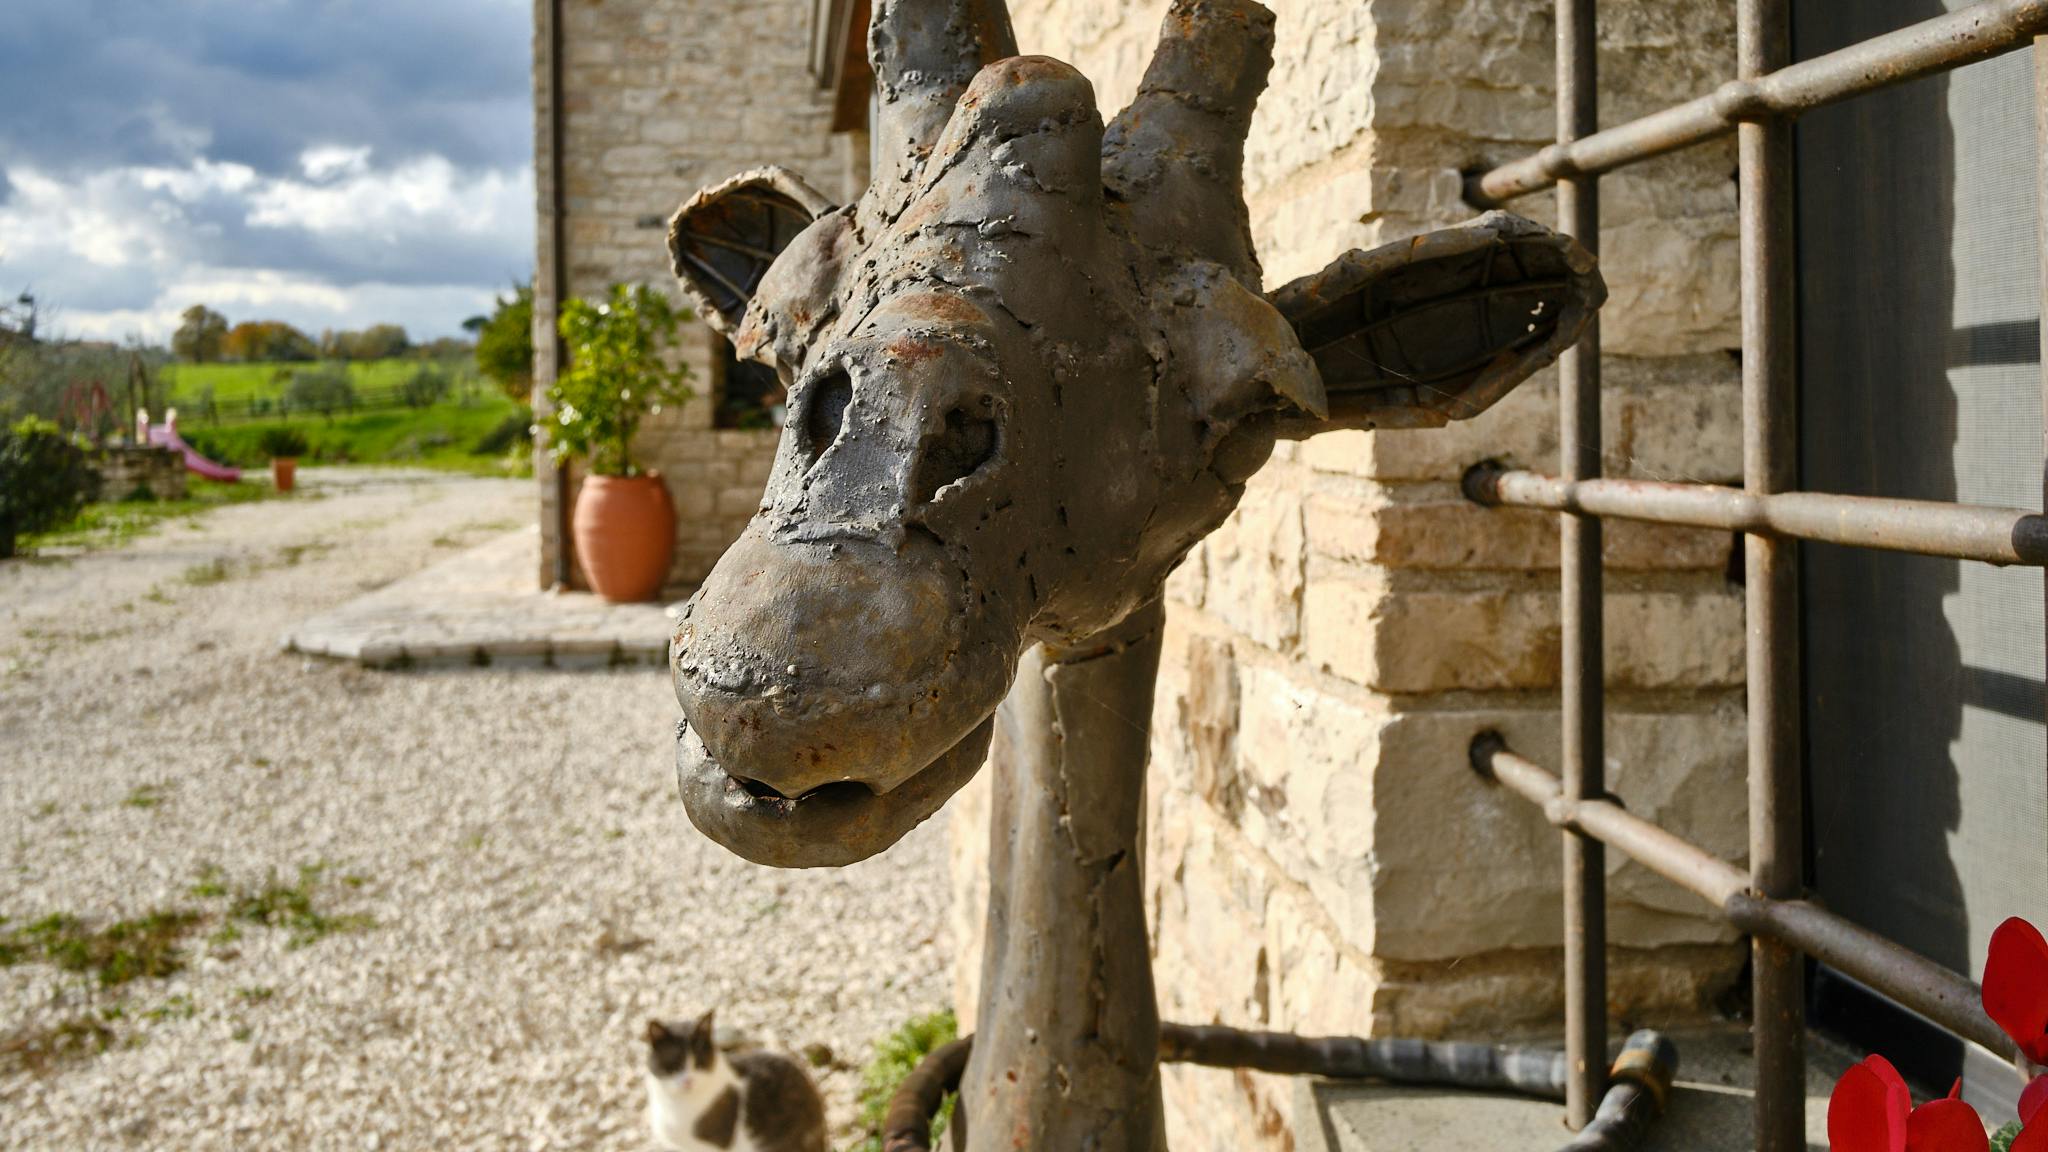 This iron giraffe from Kenya is located outside the country chalet of Tenuta le Pietre.